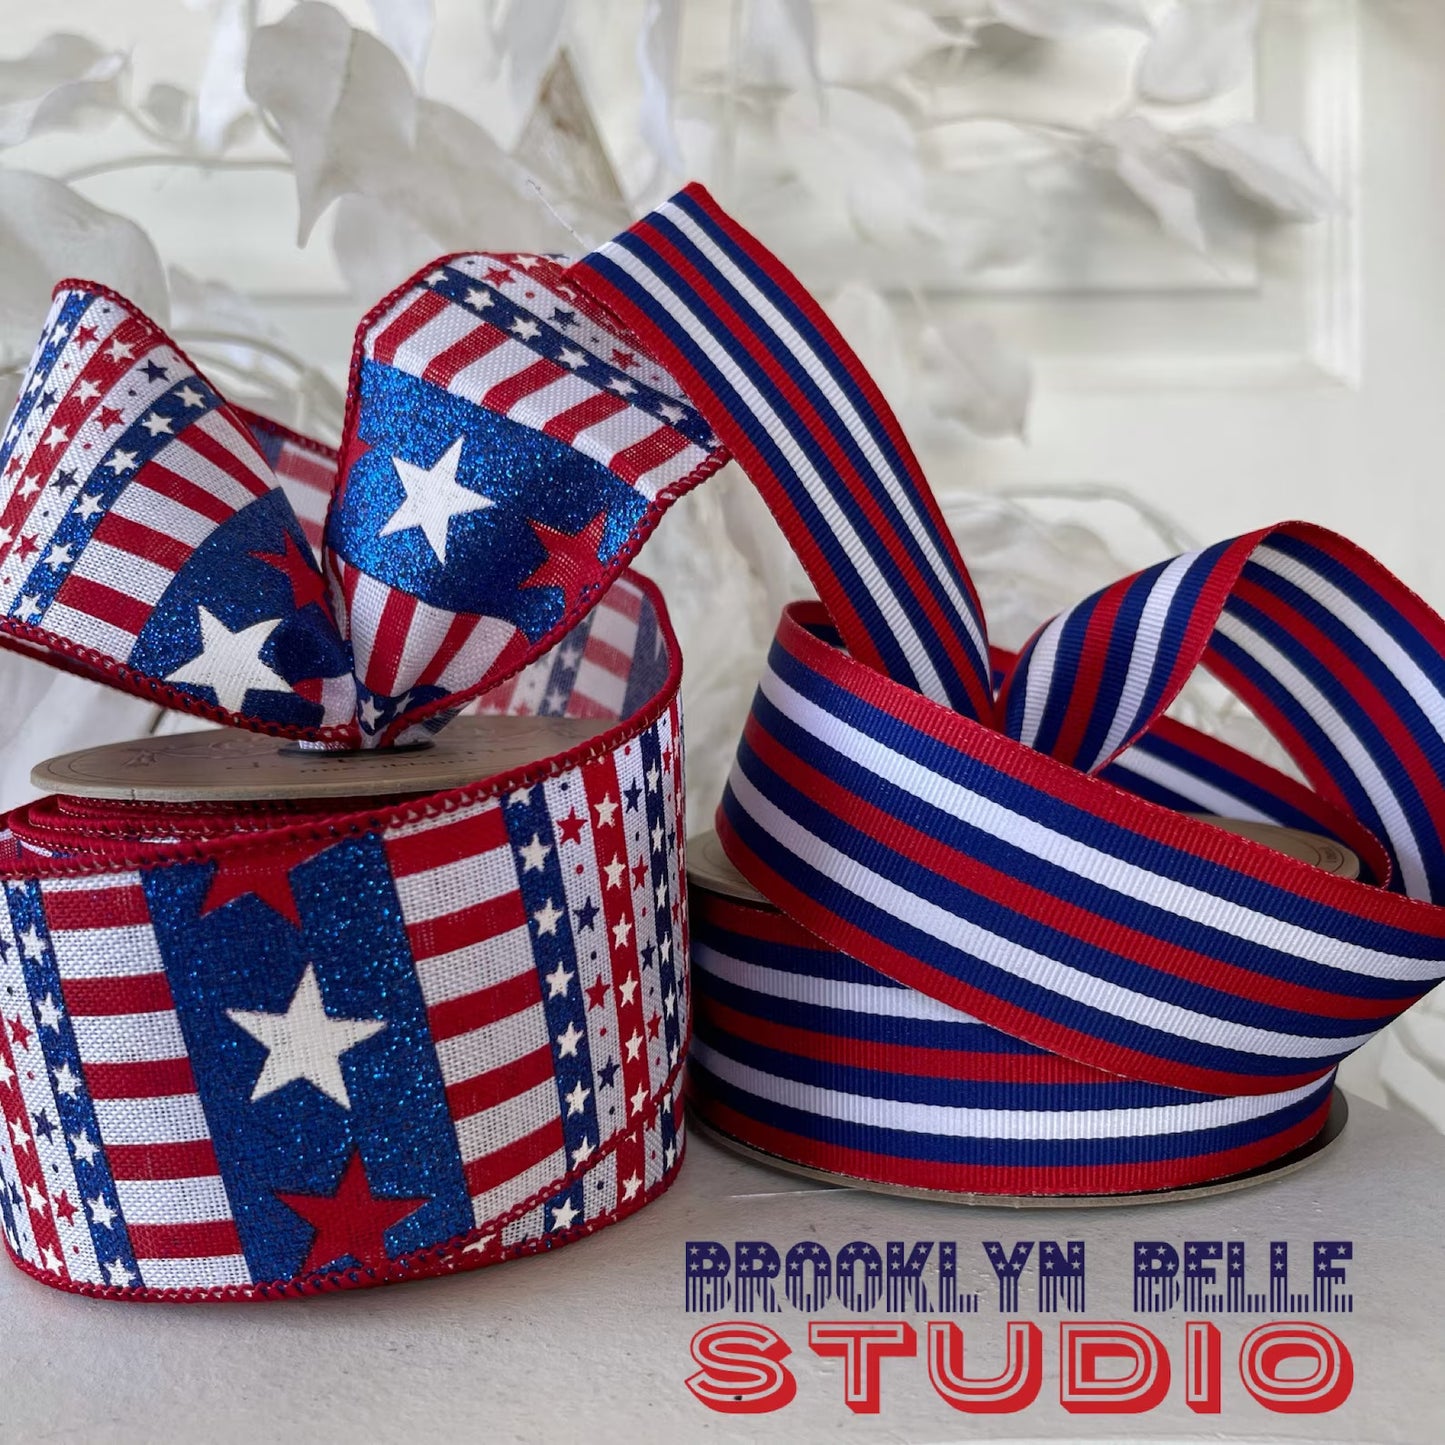 God Bless America Wreath • Independence Day Wreath